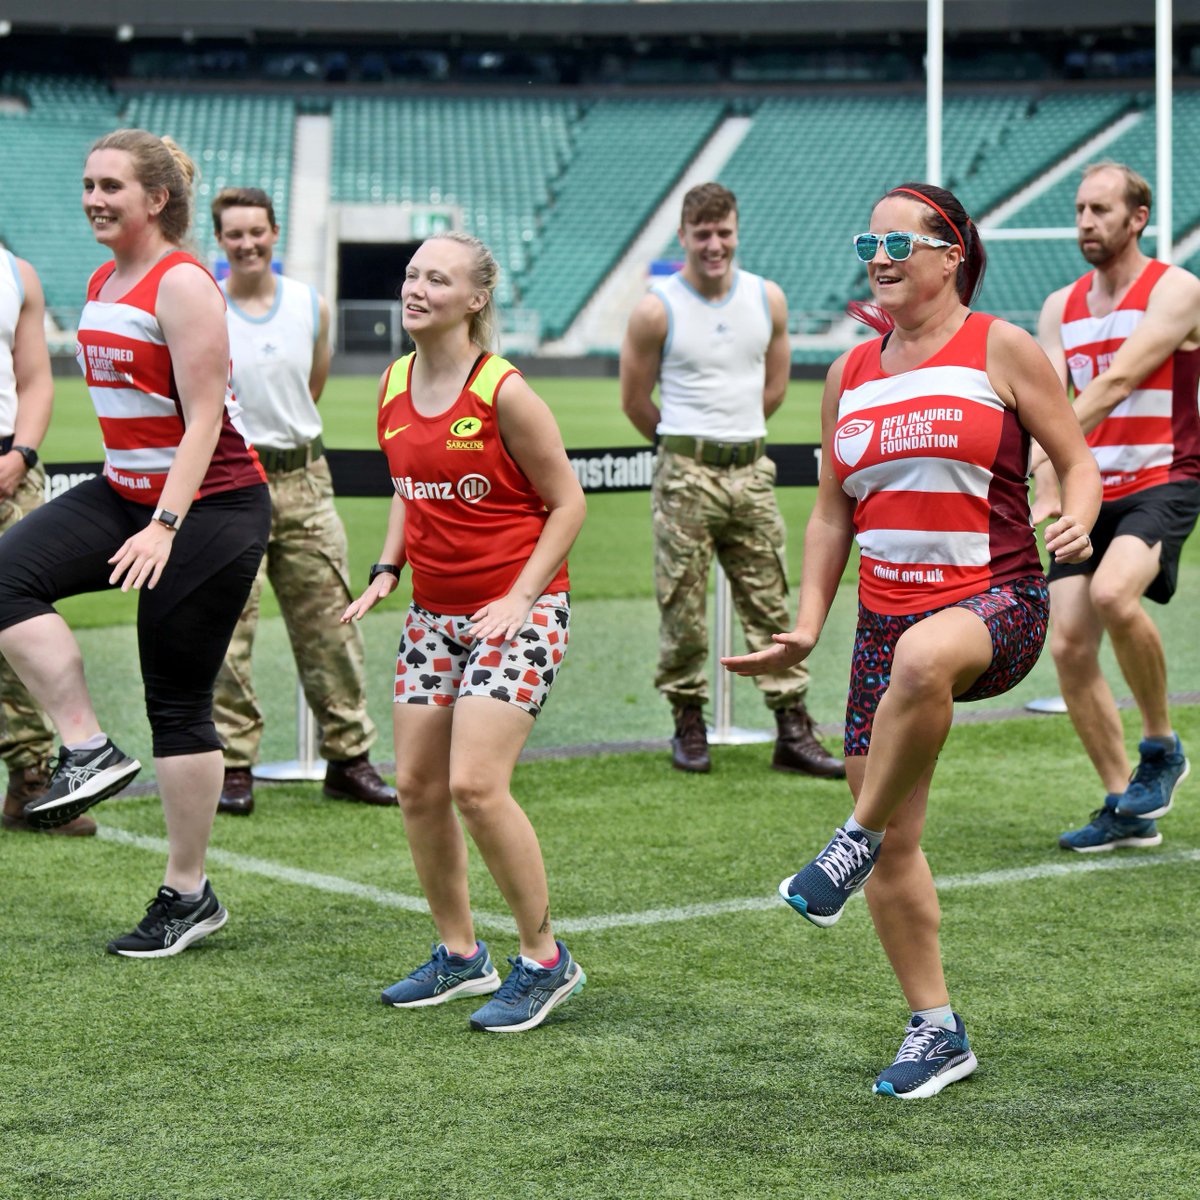 This year’s @LondonMarathon #RugbyRunners attended Twickenham for our annual training day where colleagues from @RoyalAirForce put them through their paces in a training session pitch side! Fancy training pitch side? Register now for 2023 ➡️bit.ly/3S3yvVA #rugbyfamily